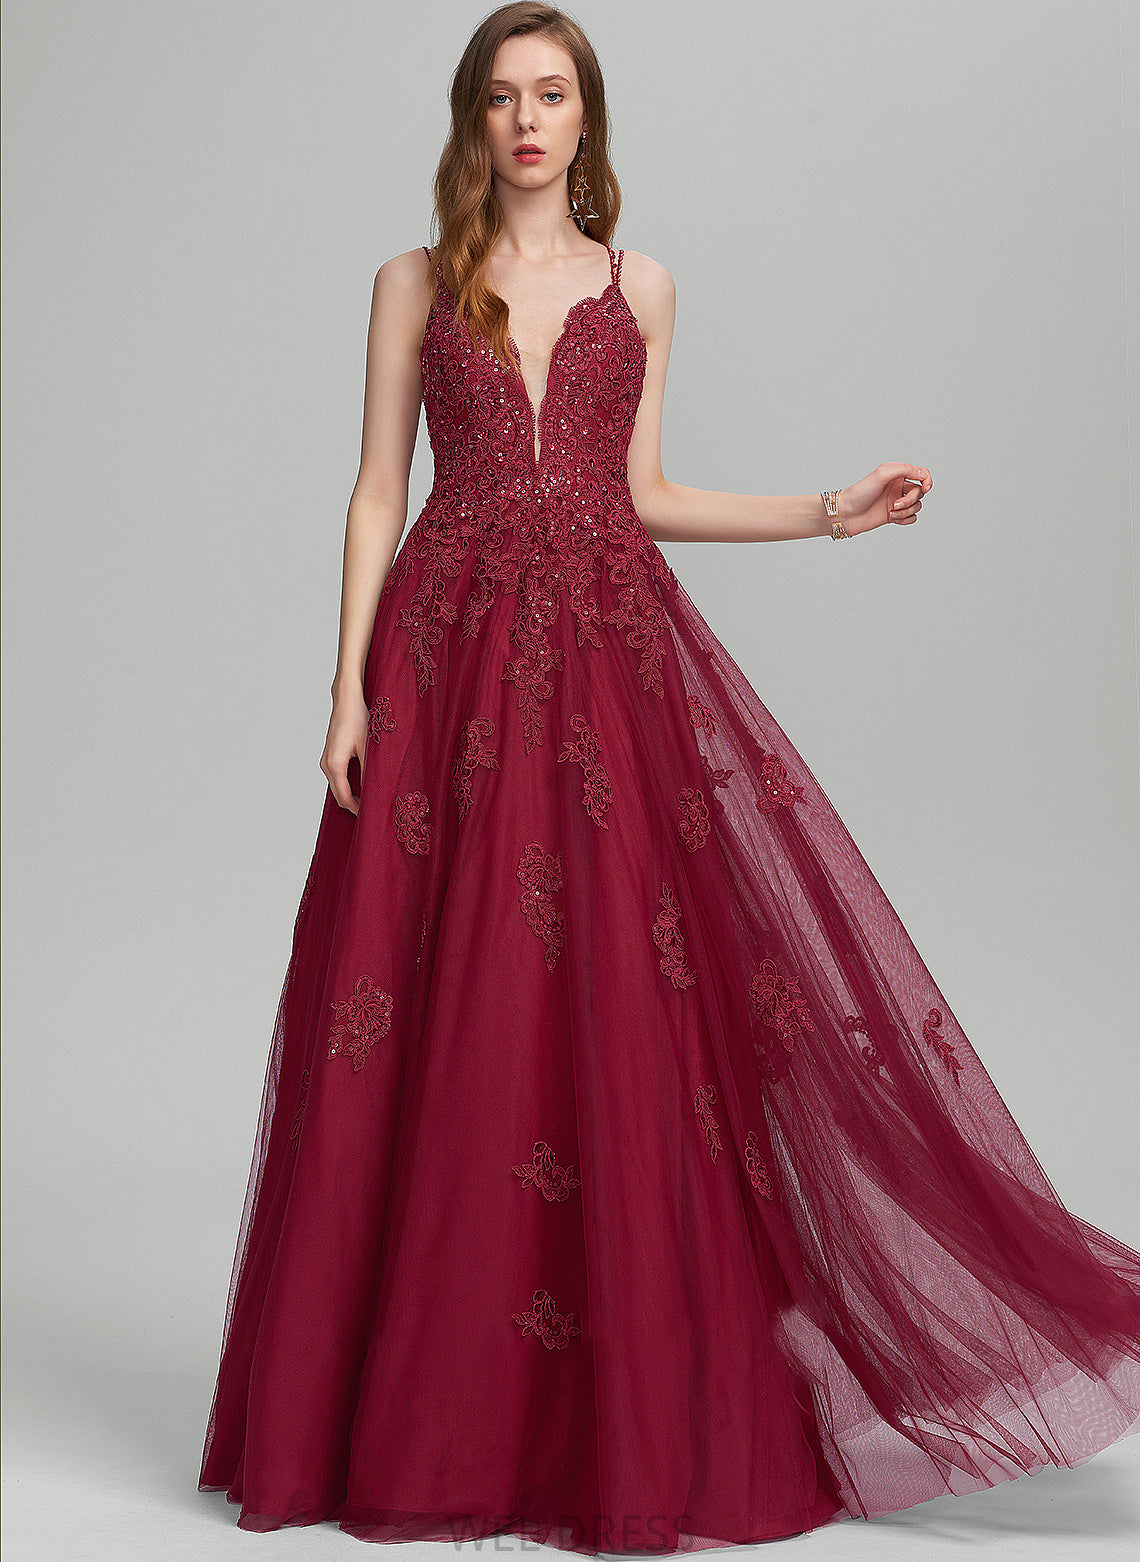 With Prom Dresses Beading Floor-Length A-Line Cara V-neck Sequins Tulle